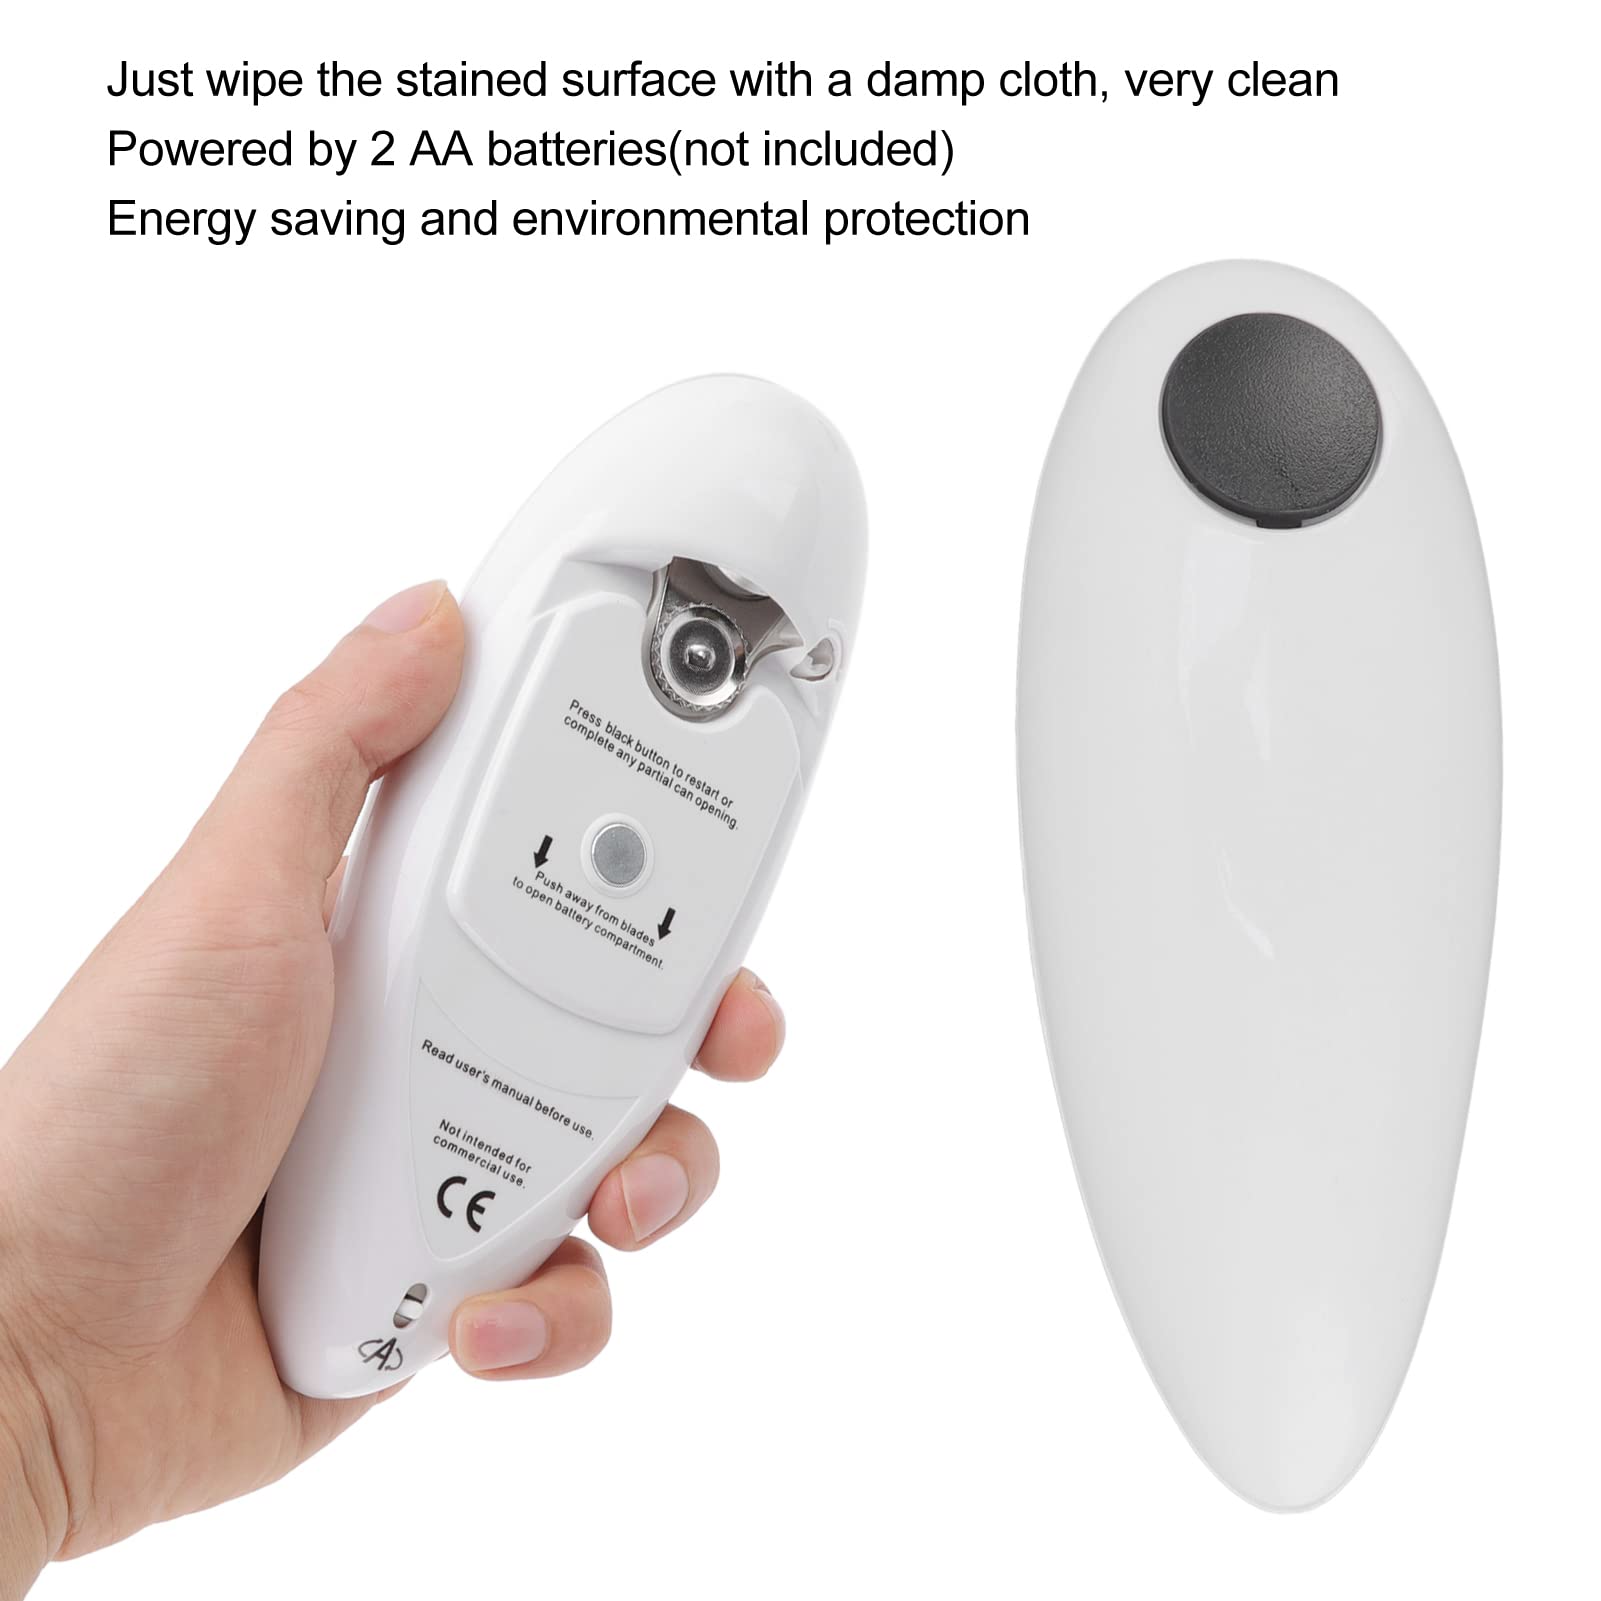 Zerodis Bottle Openers, Electric Can Opener Portable One Touch Automatic Can Opener with Manual Bottle Opener for Kitchens and Restaurants Hands Can Opener with Less Effort to